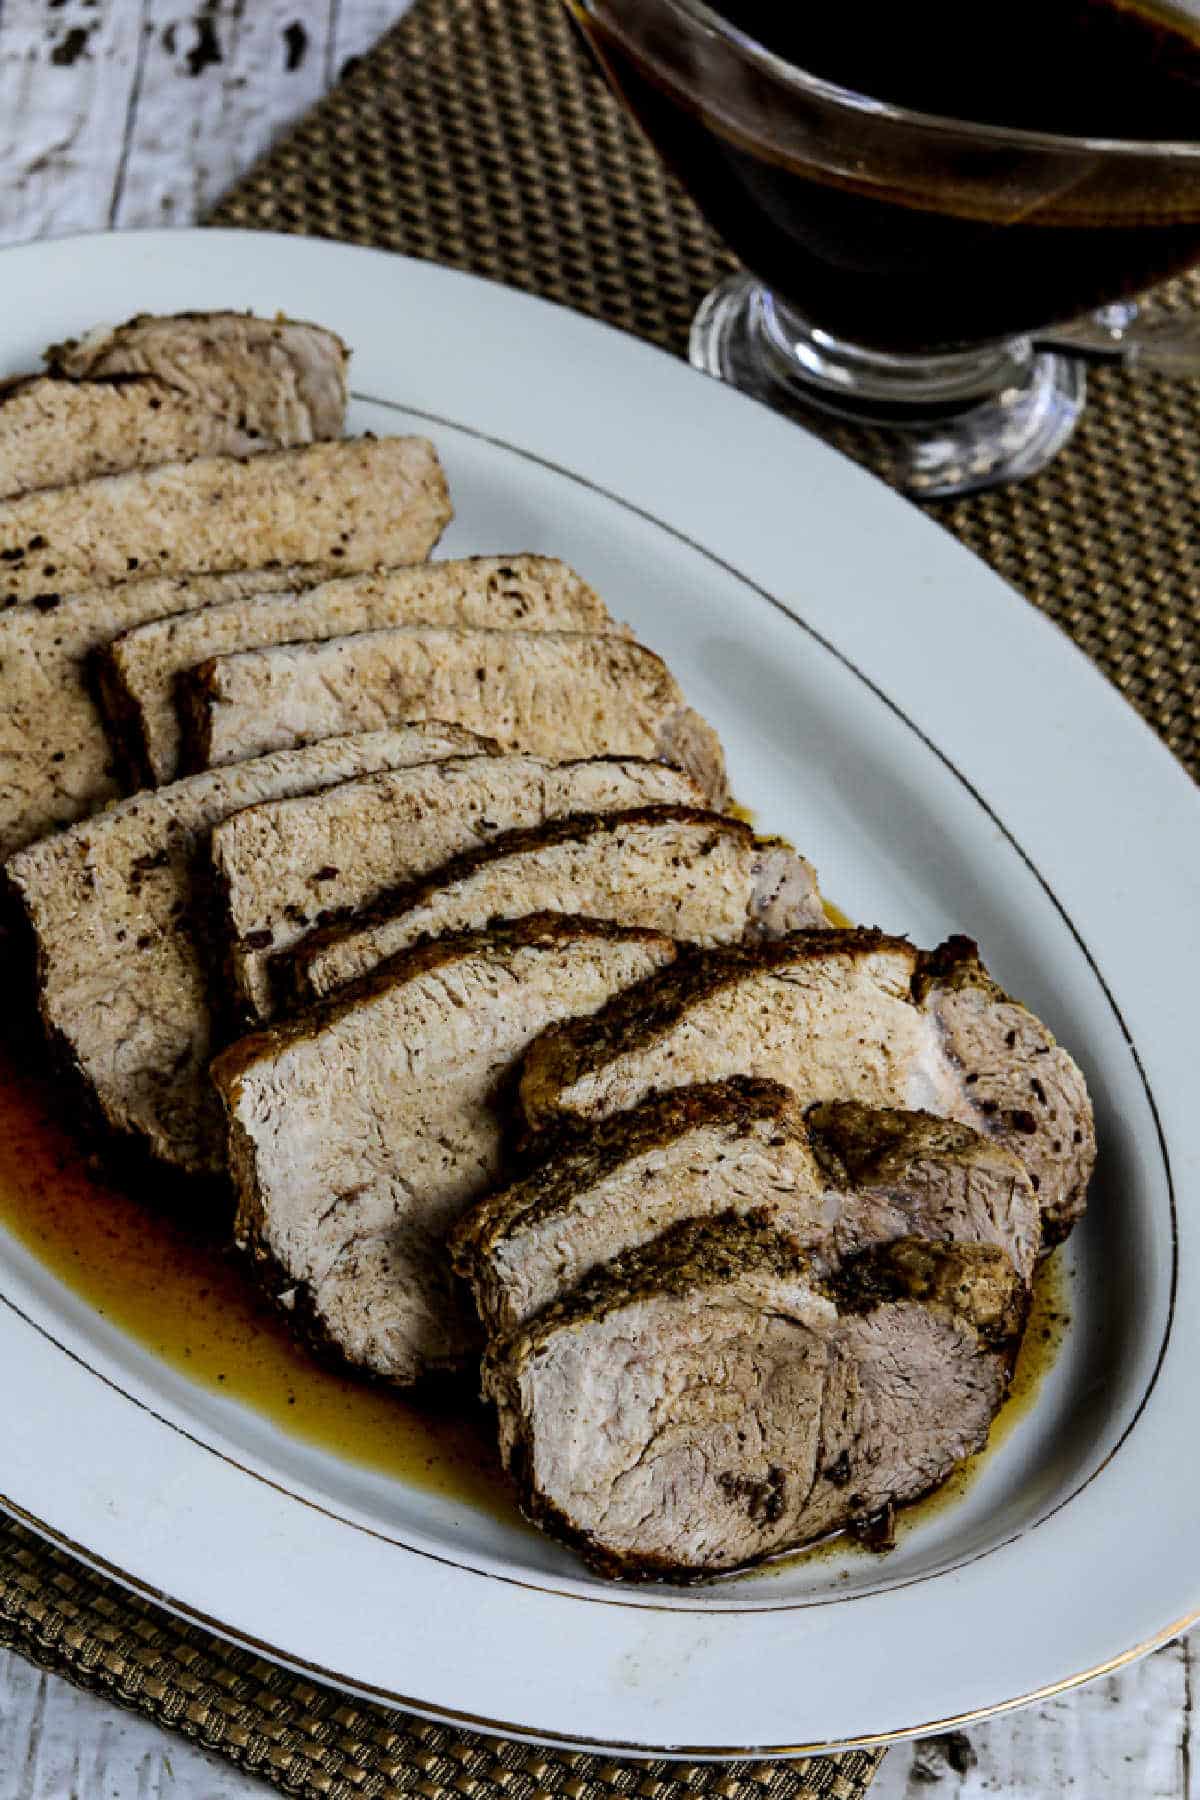 Instant Pot Balsamic Pork Roast on serving platter with formal napkin and sauce boat in background